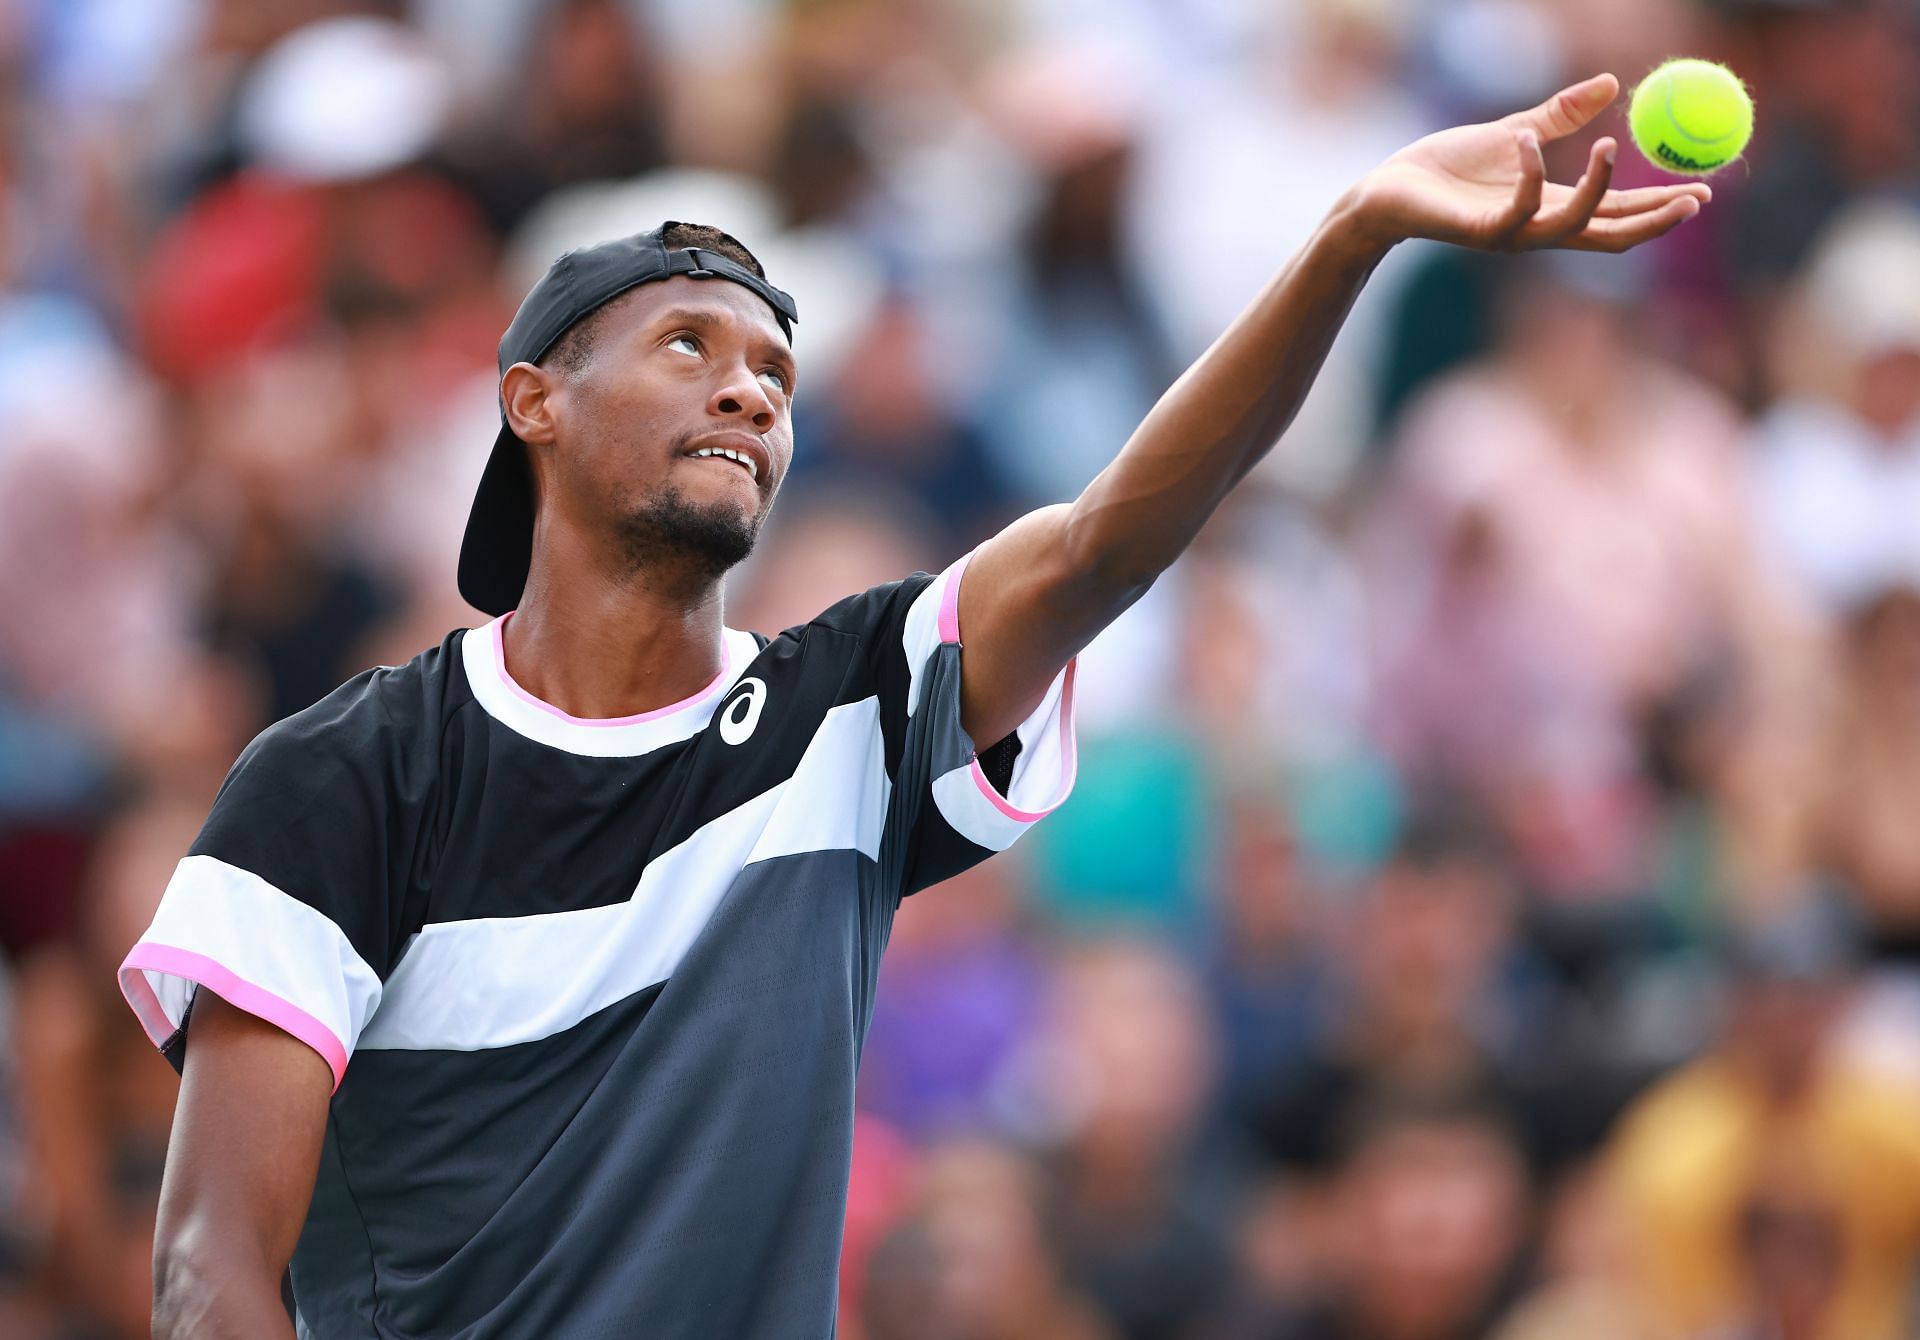 Christopher Eubanks in action: Canadian Open